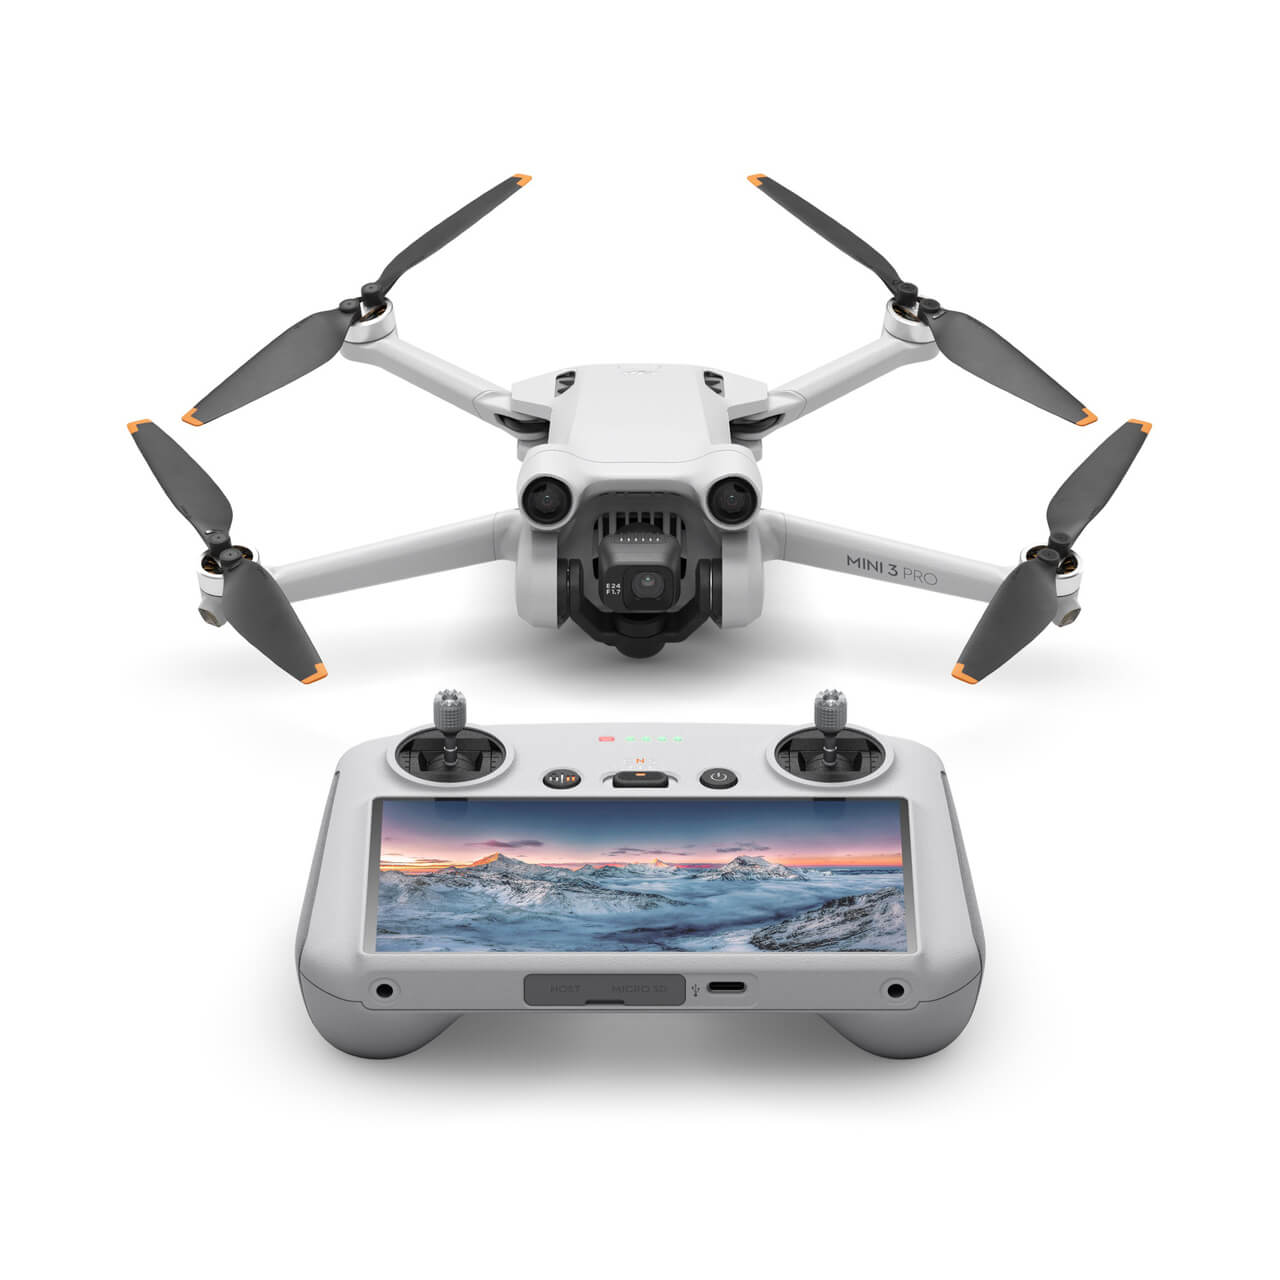 You are currently viewing DJI Mini 3 Pro unveiled